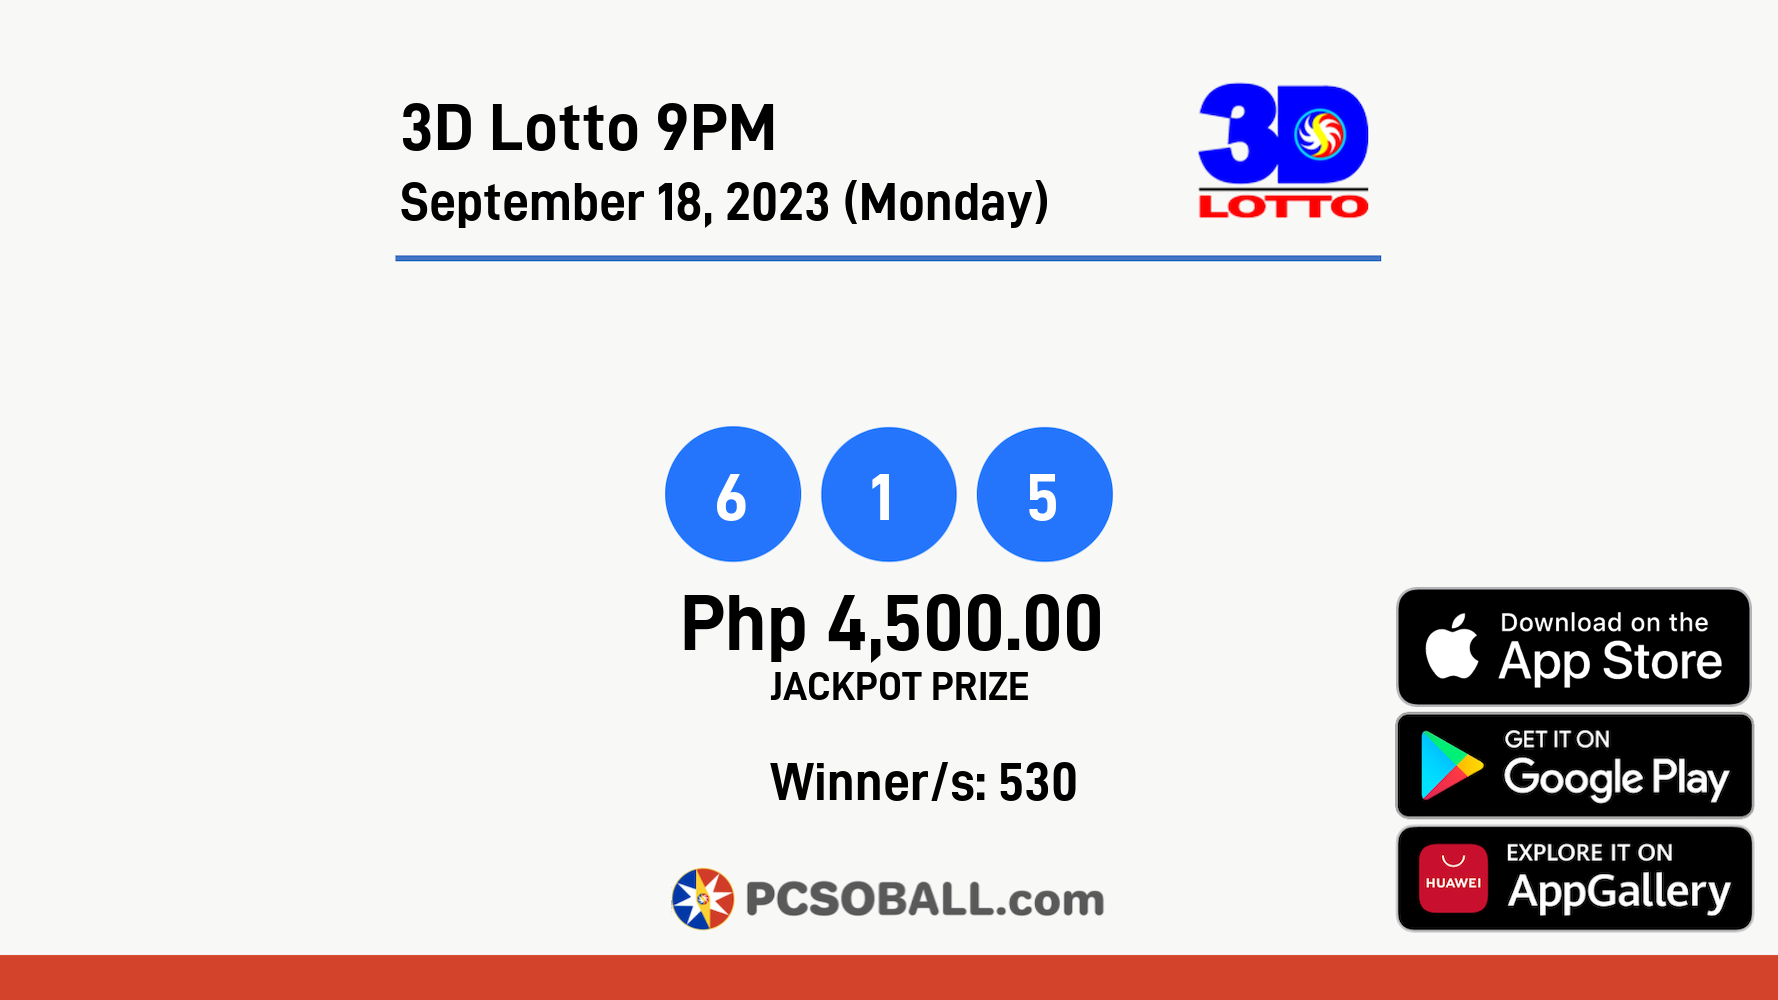 3D Lotto 9PM September 18, 2023 (Monday) Result